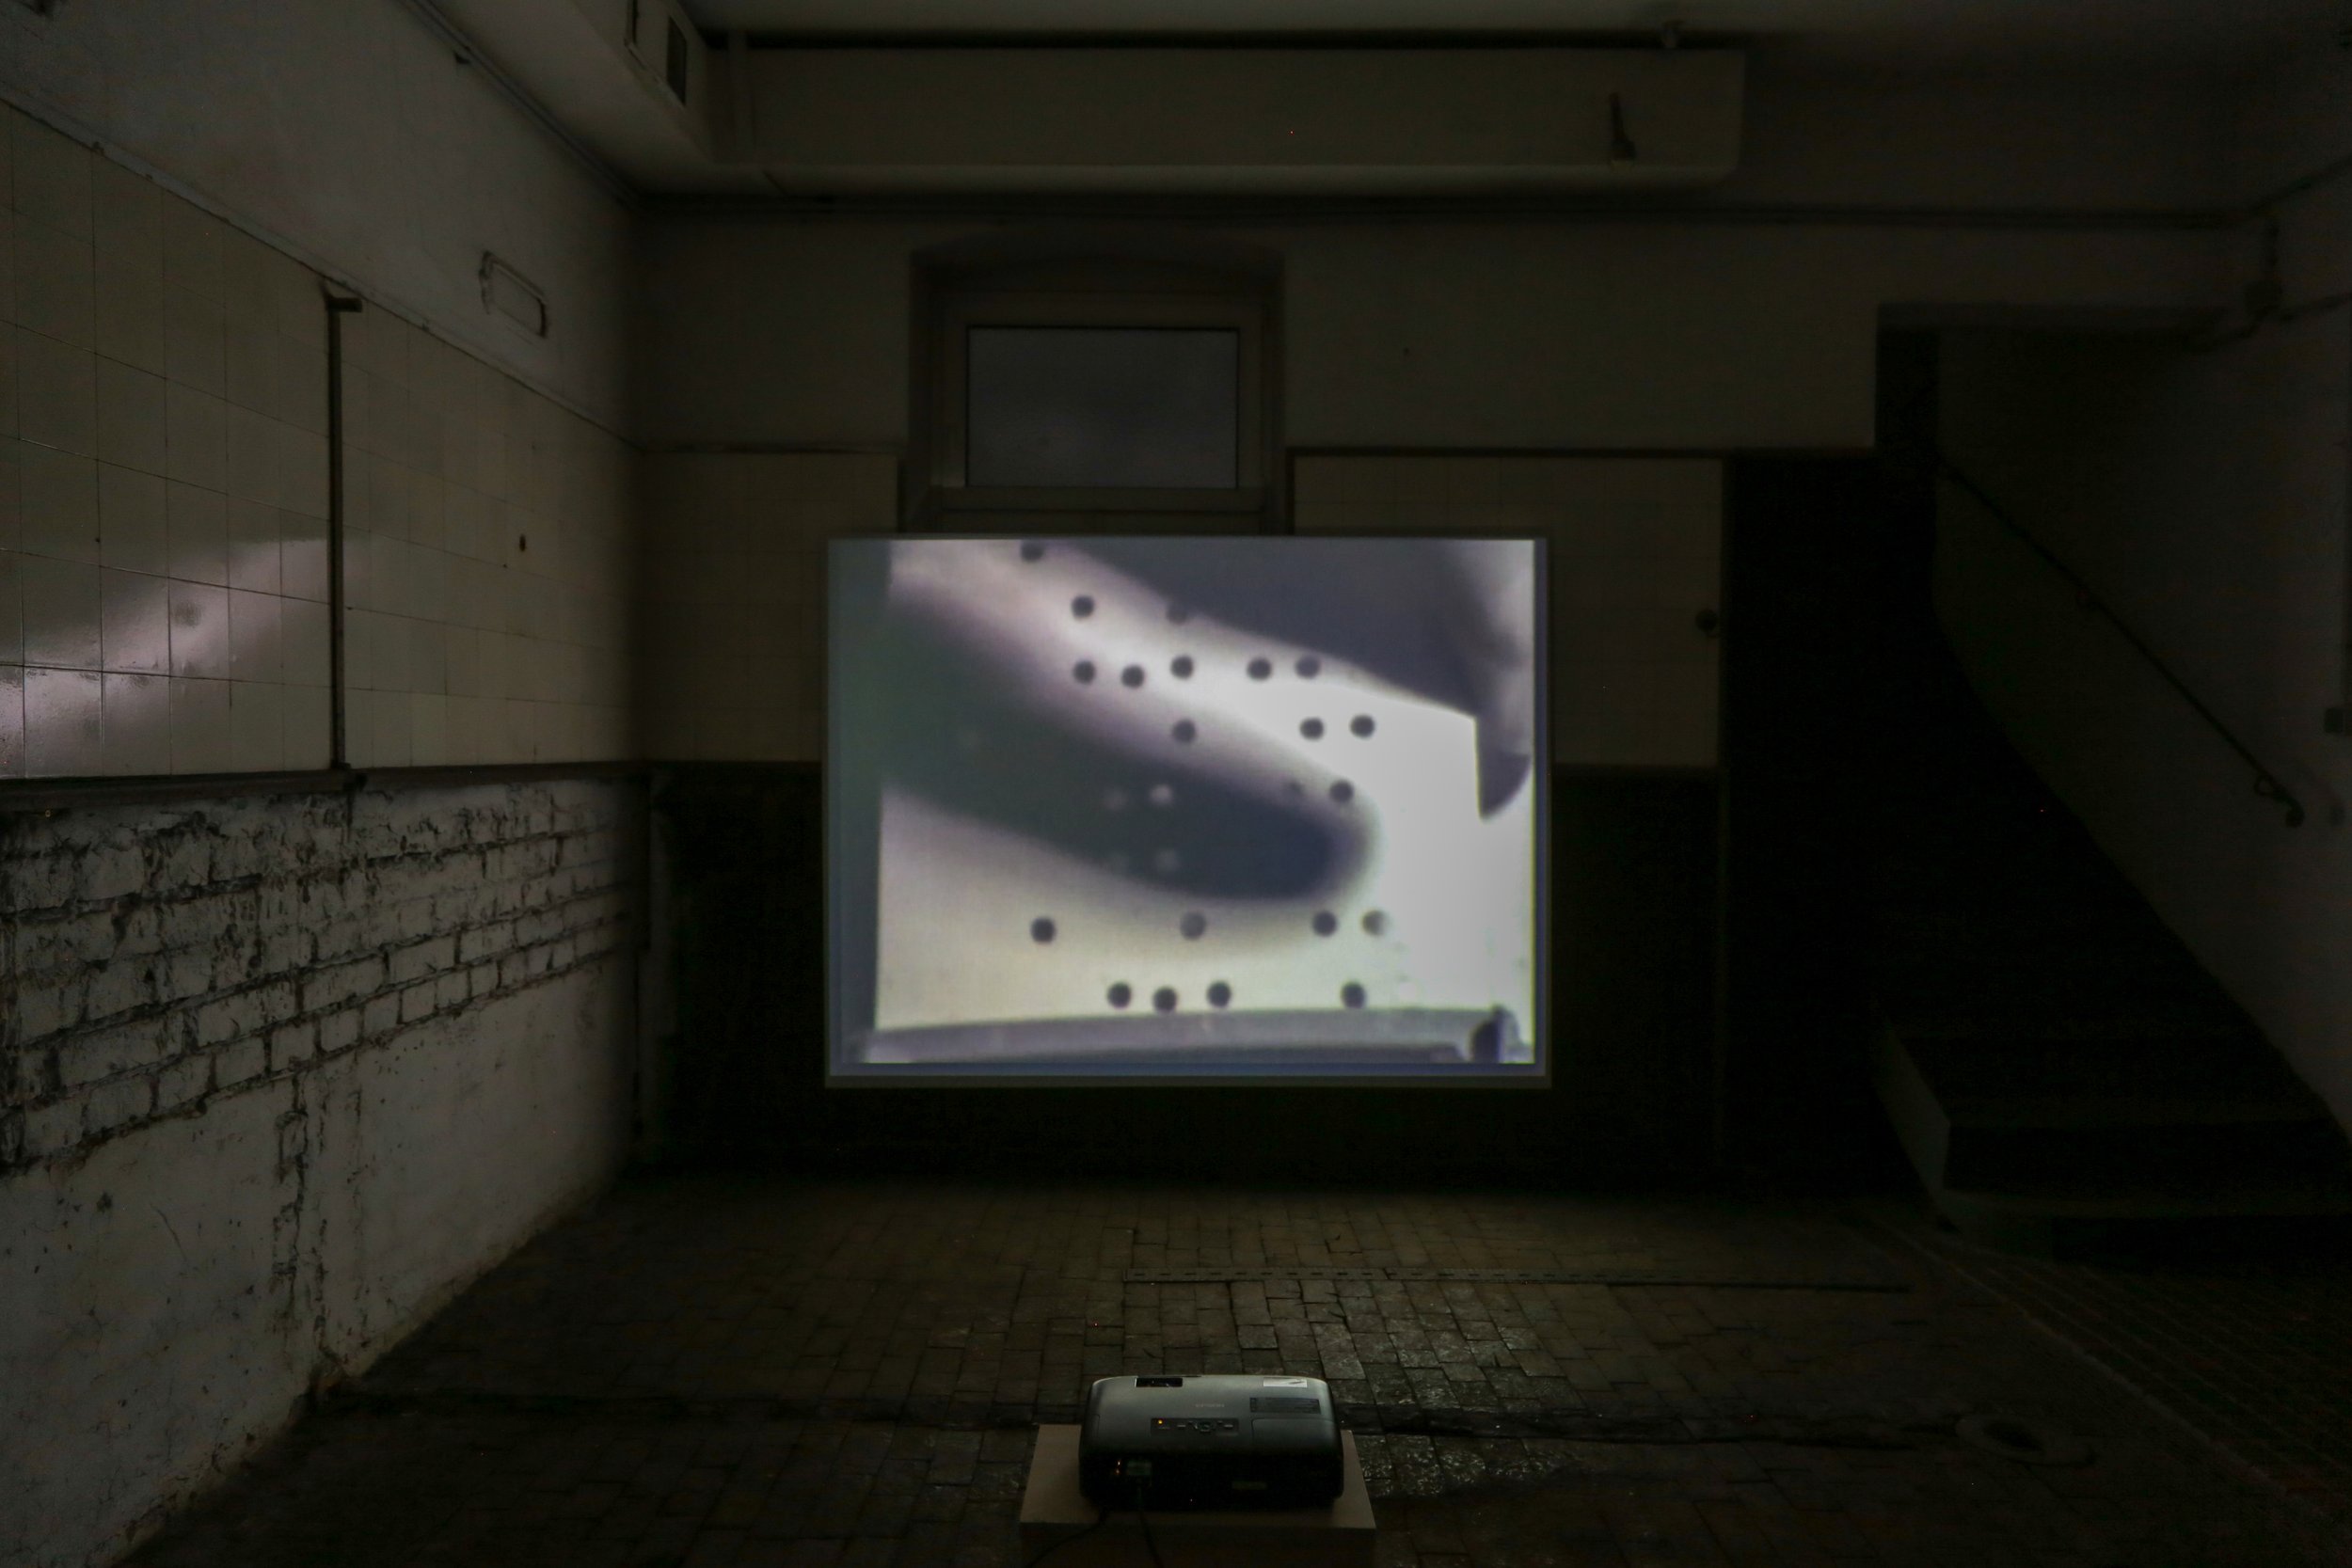   fig26 installation view Joan Jonas, Performance, 1979, 00:11:43., In collections: De Appel, LIMA  